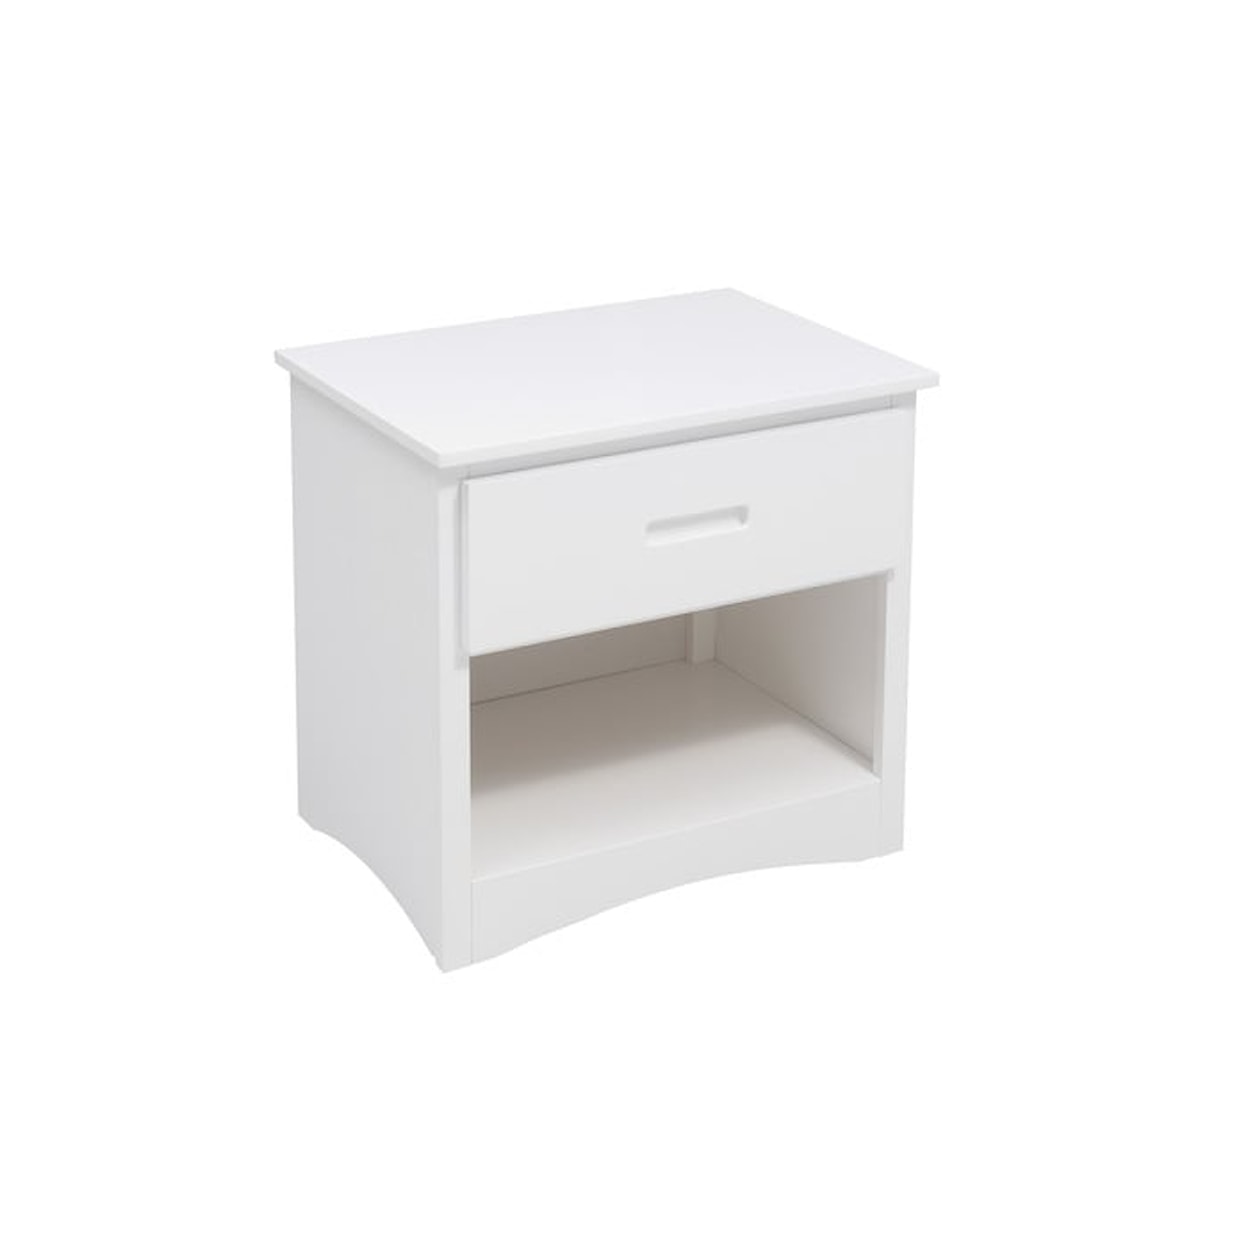 Homelegance Furniture Discovery Nightstand